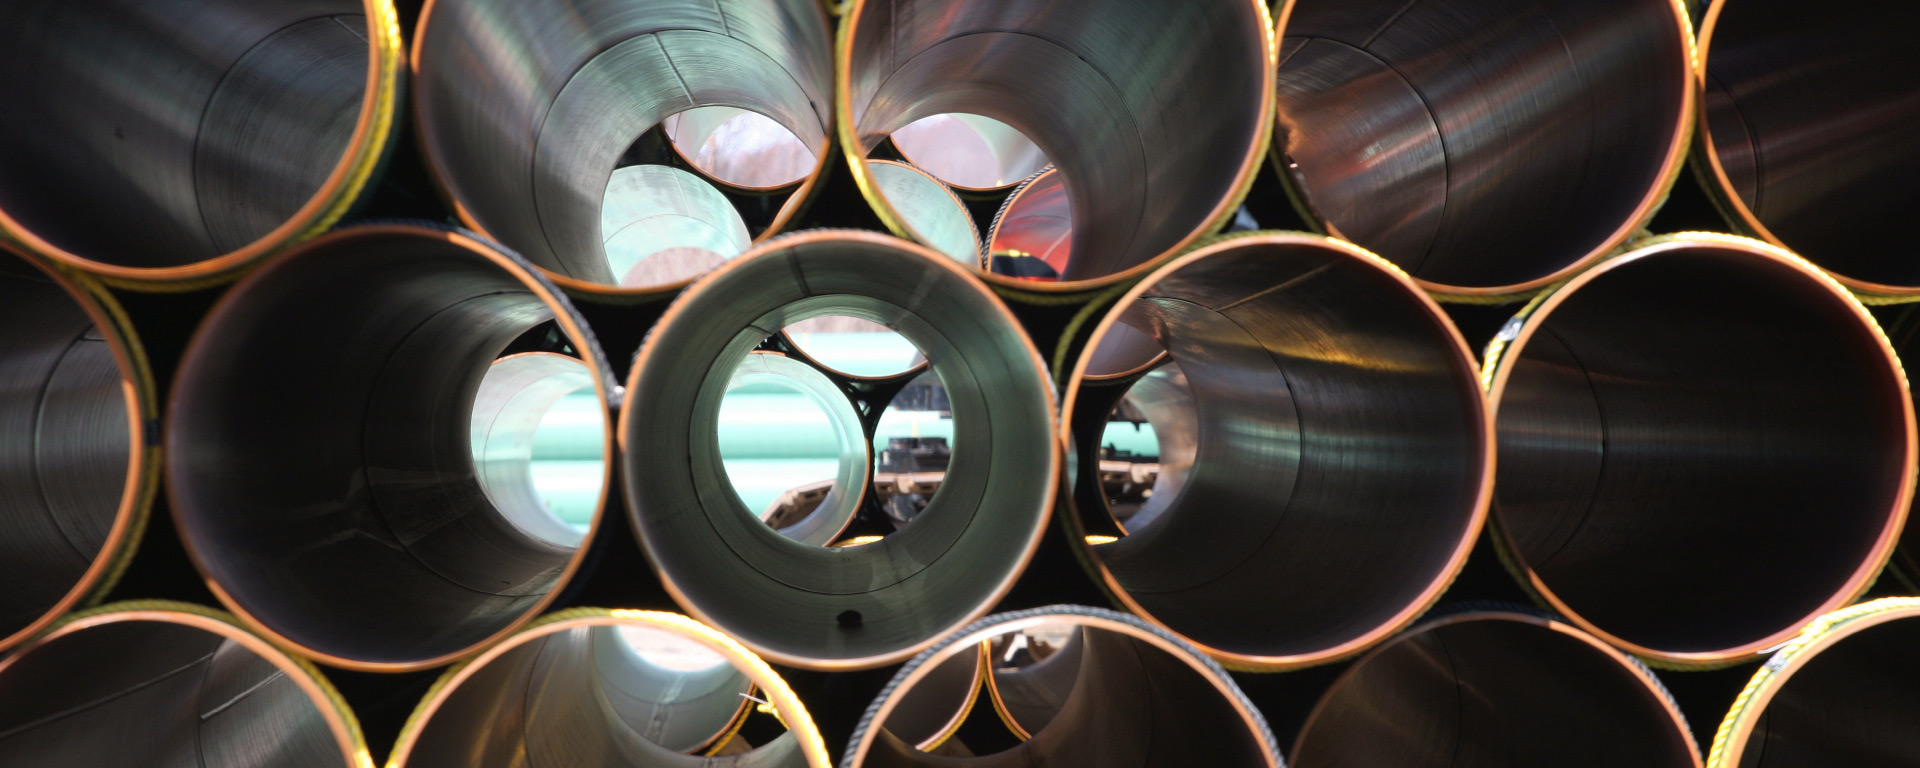 industry sectors charter coating pipes